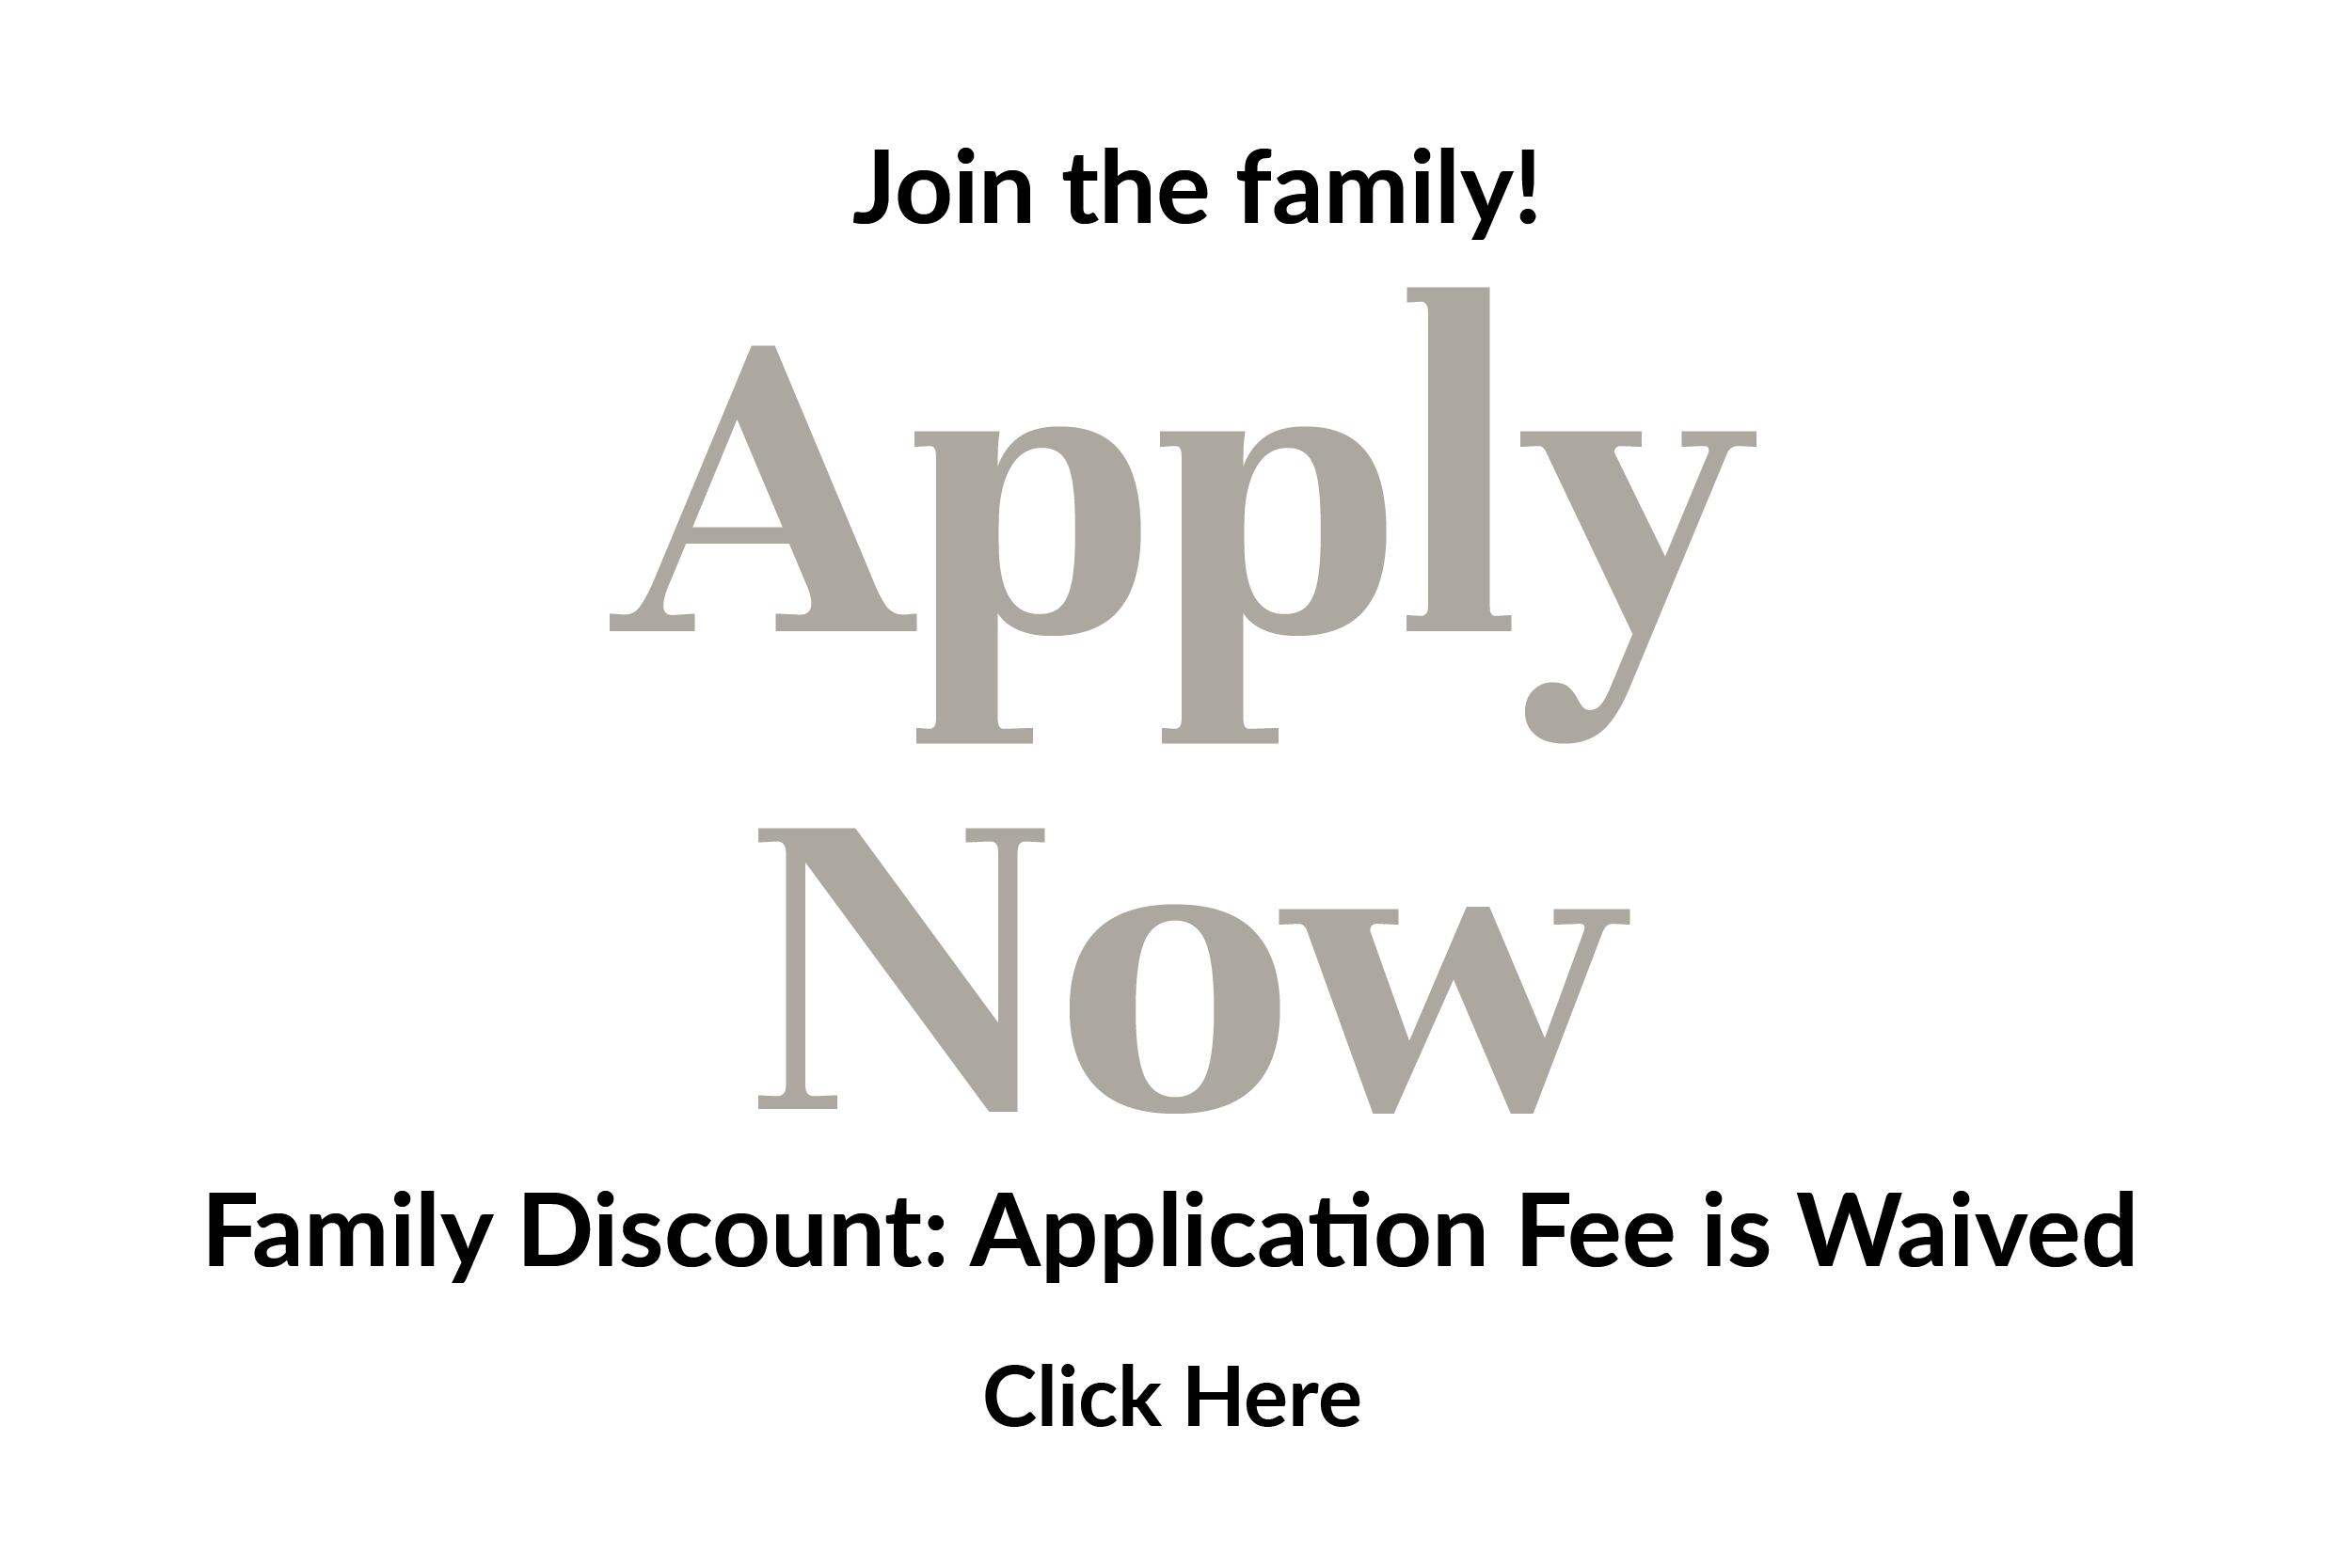 Join the family! Apply Now! Family Discount: Application Fee is Waived